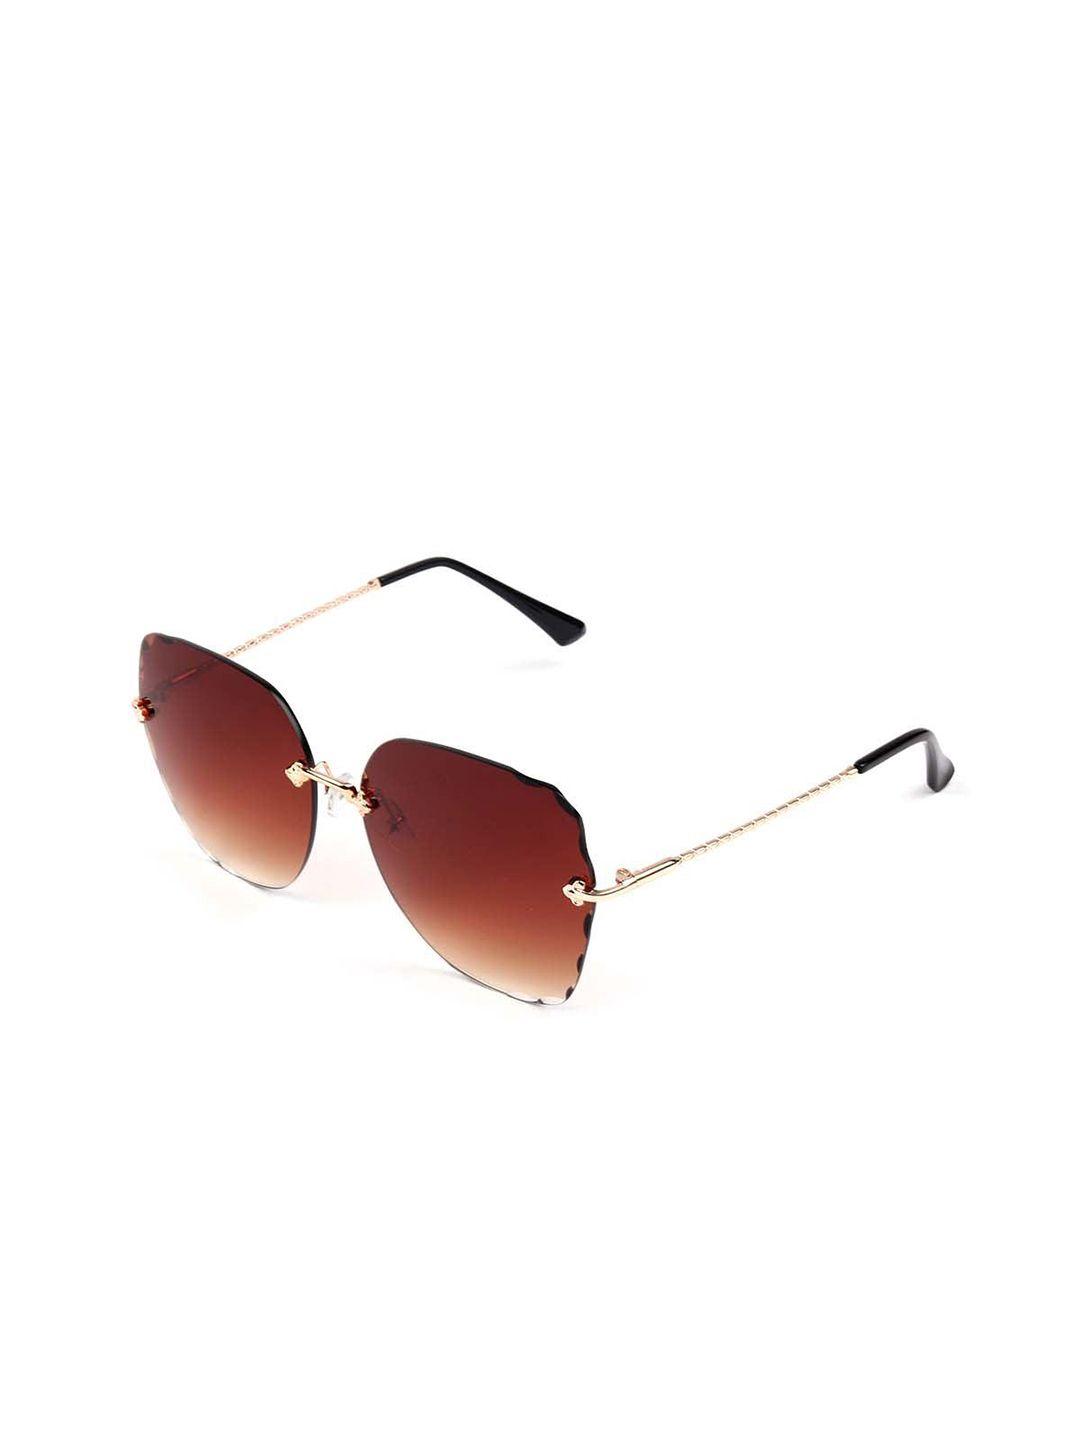 odette-women-oversized-sunglasses-with-uv-protected-lens-new167